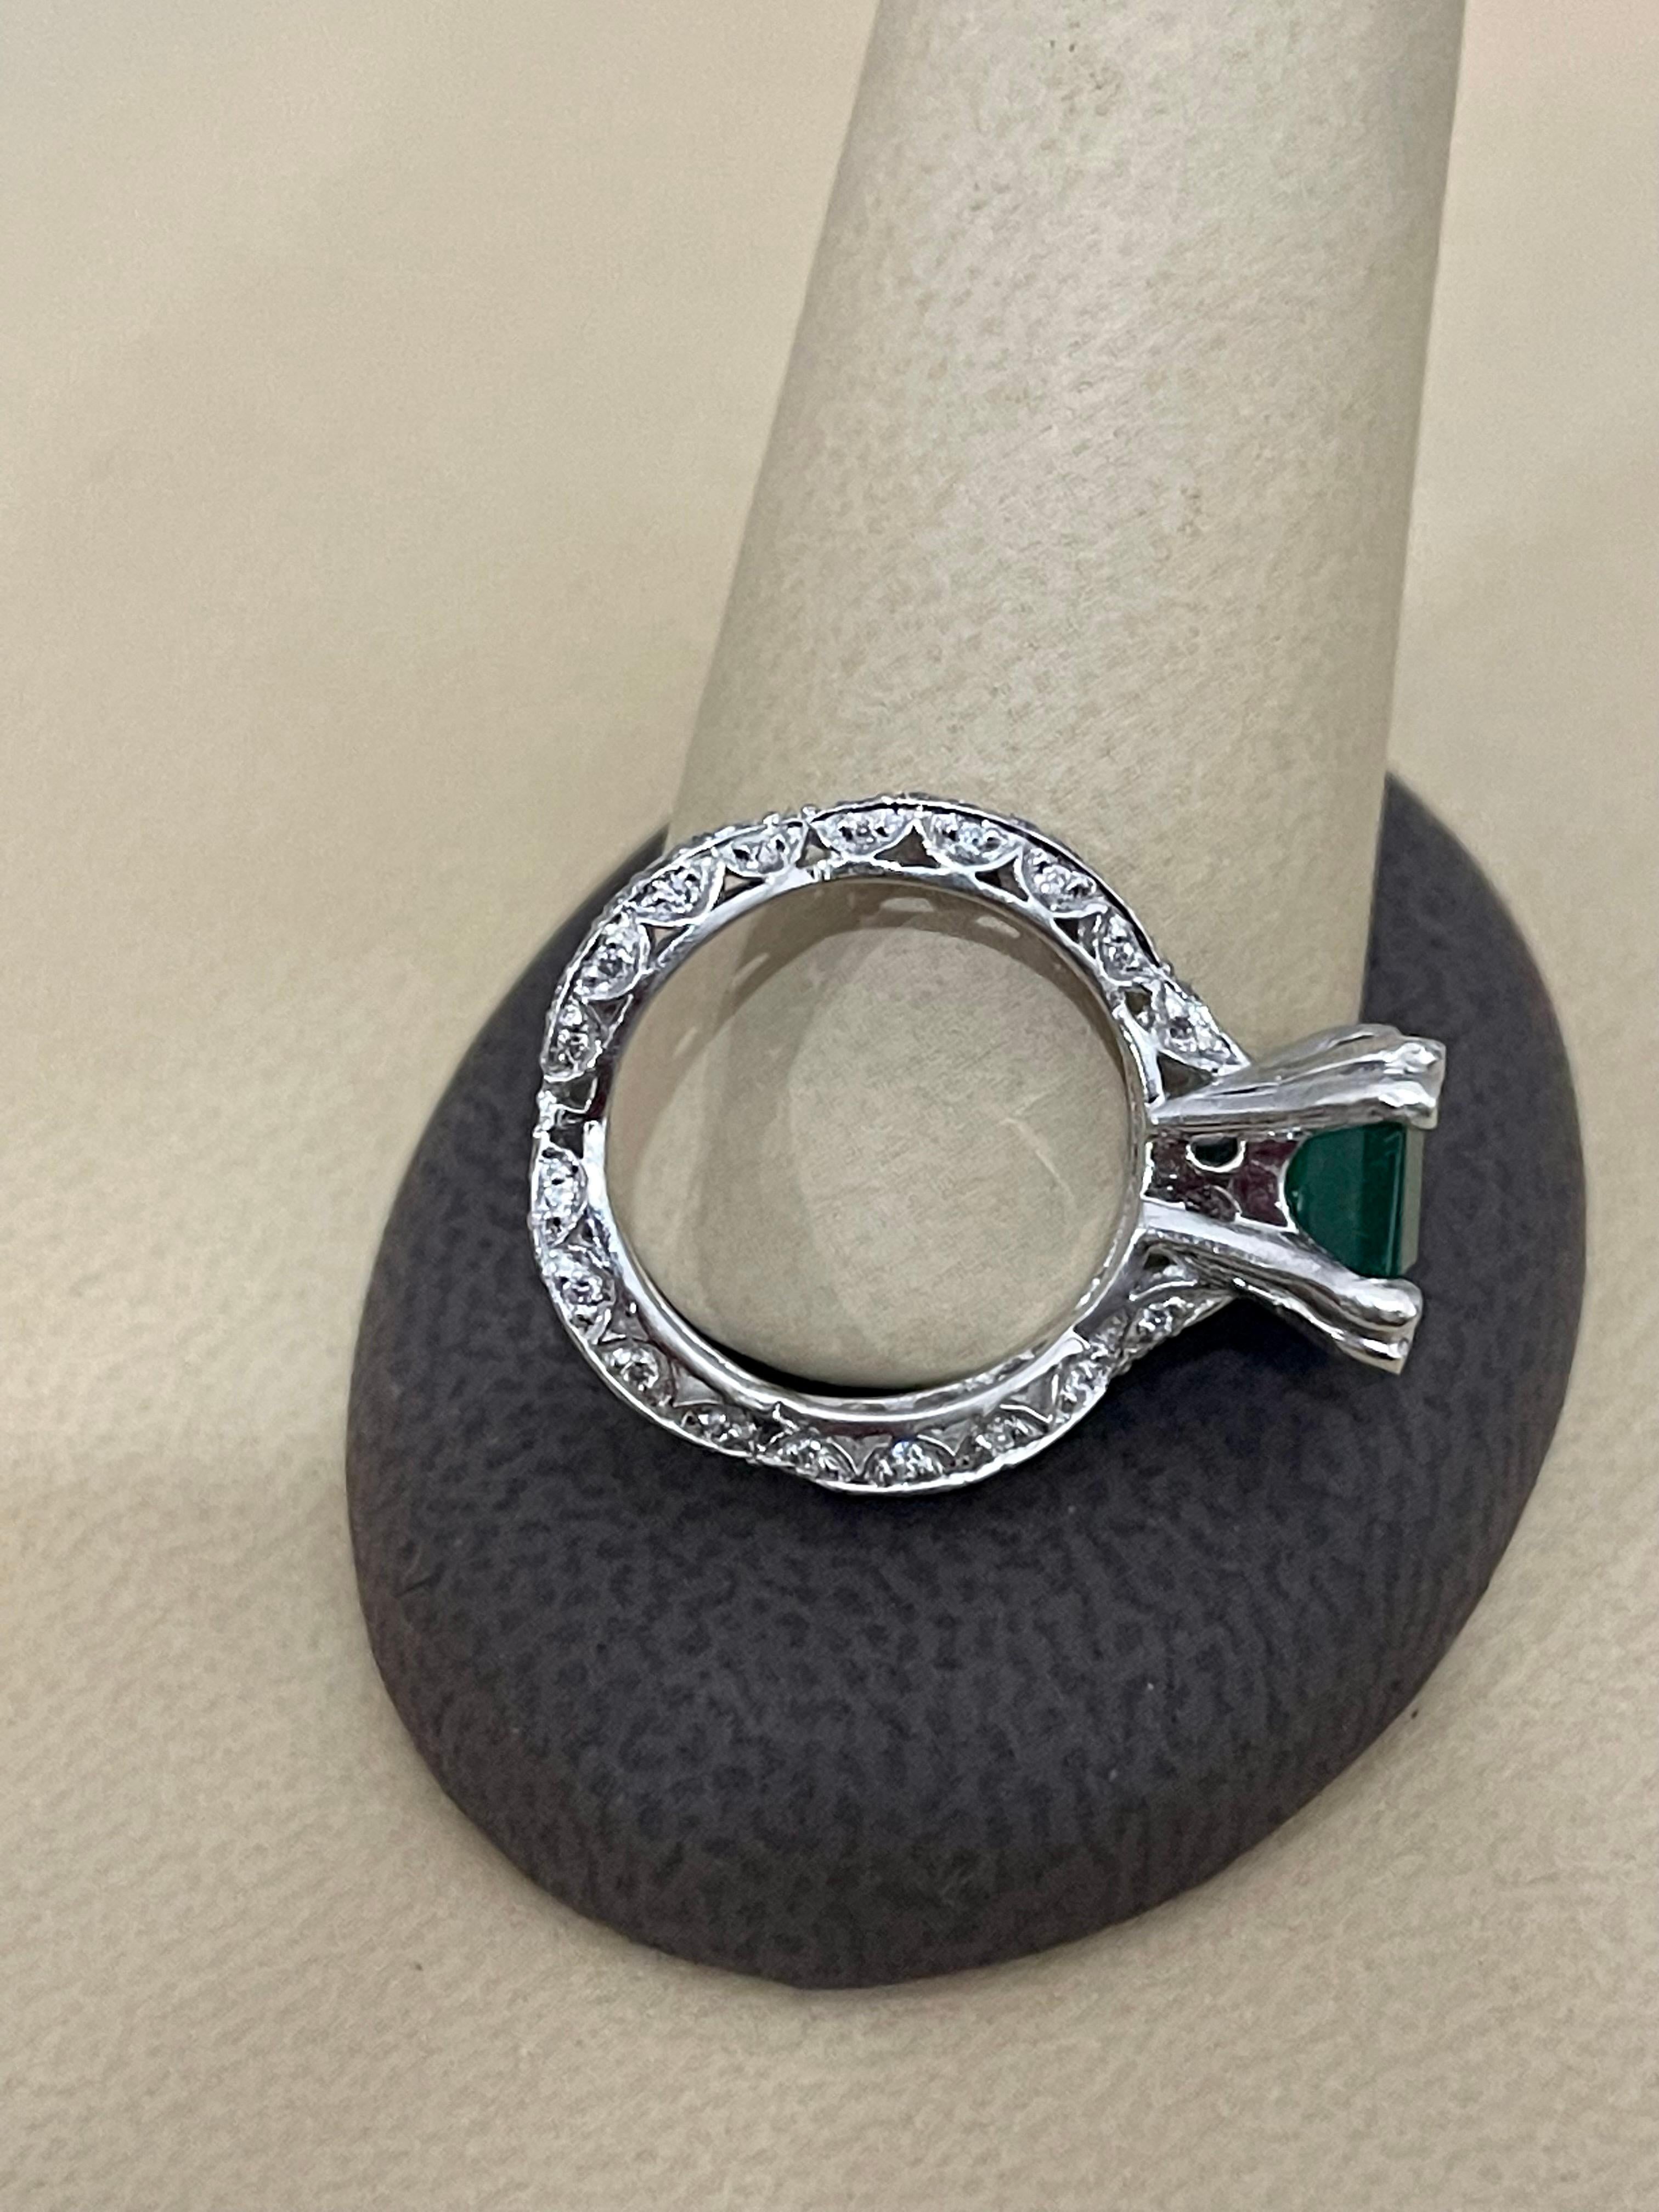 2 Carat Natural Square Emerald & 0.65 Ct Diamond Ring in Platinum In Excellent Condition For Sale In New York, NY